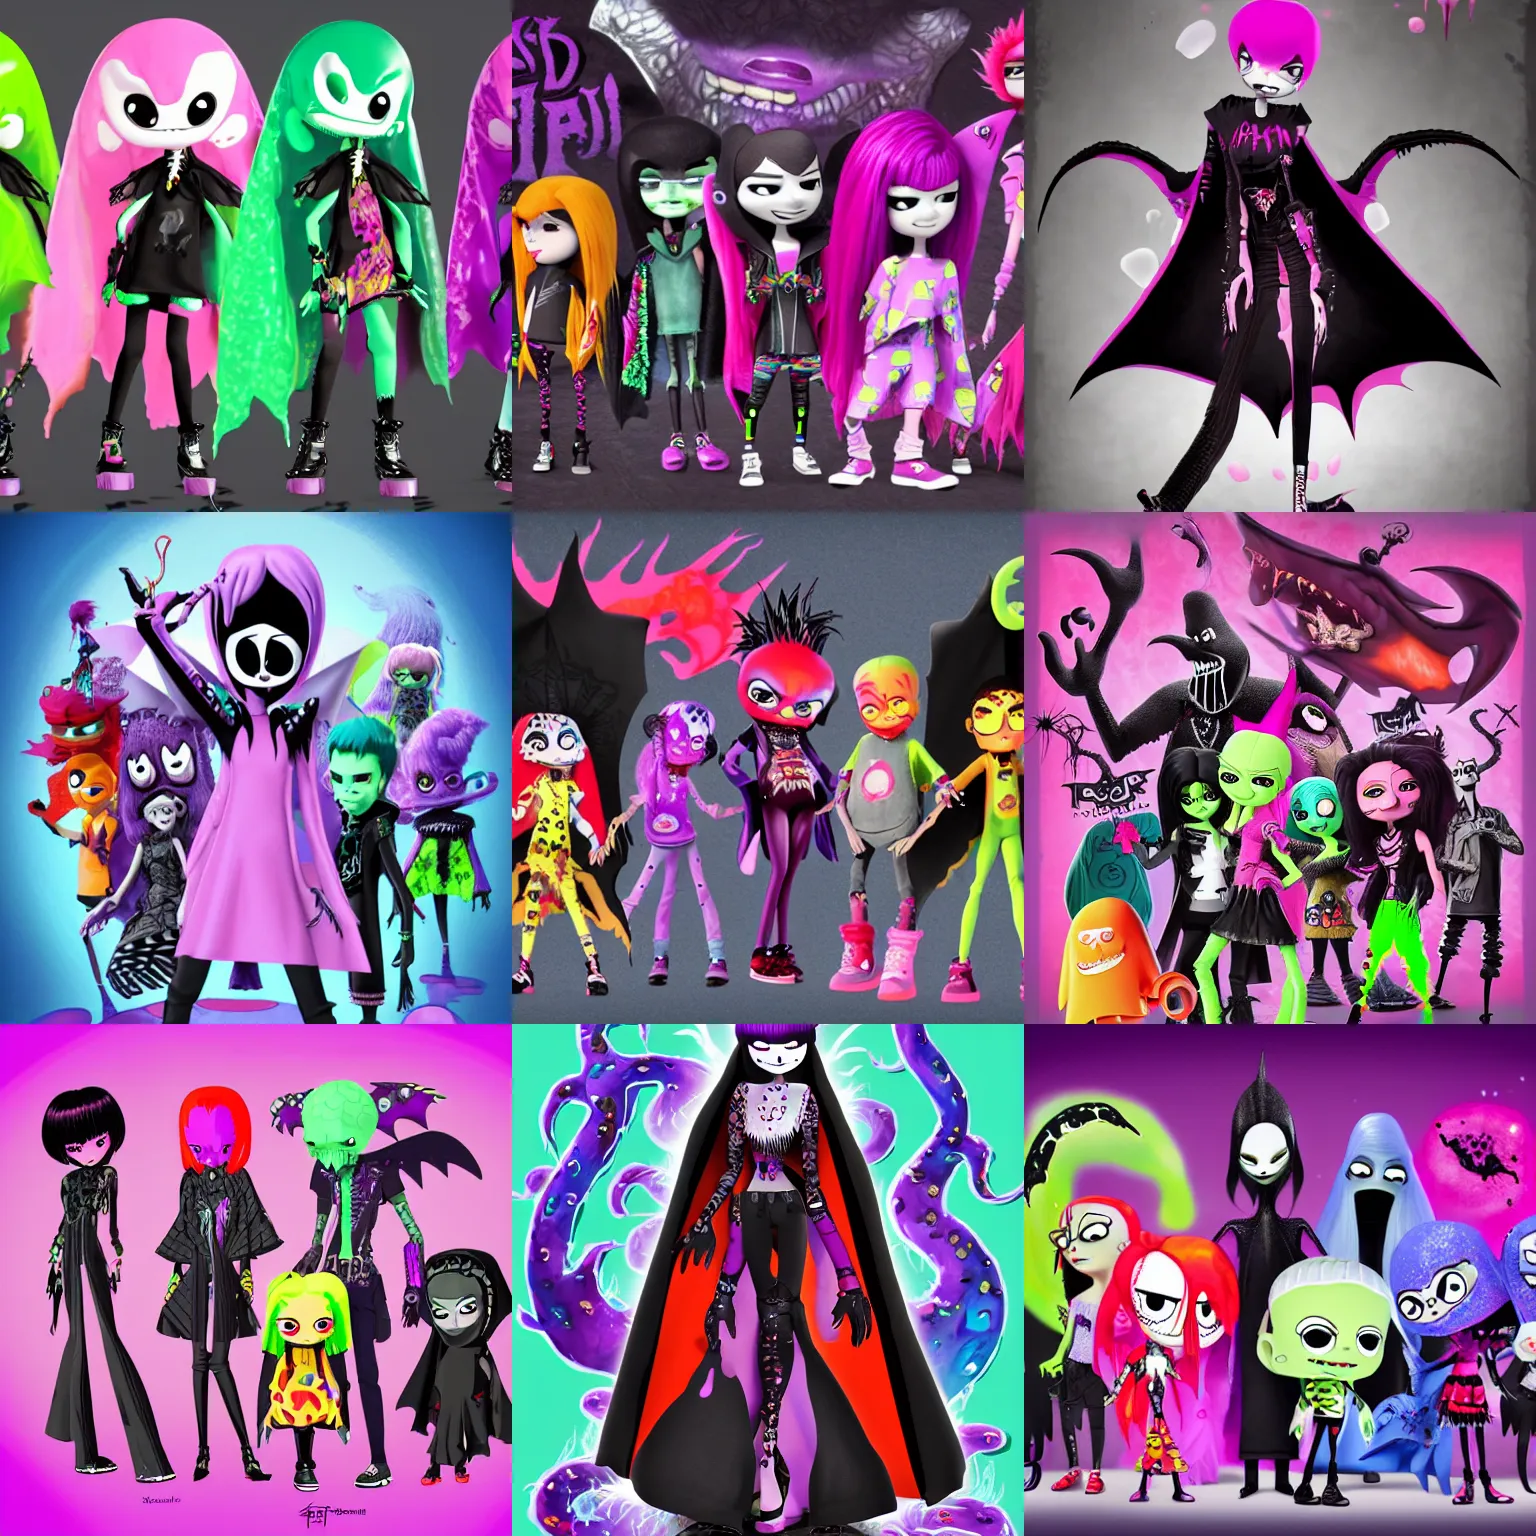 Prompt: CGI hot topic store lisa frank gothic emo punk vampiric rockstar vampire squid with transparent skin conceptual character designs of various shapes and sizes by genndy tartakovsky and splatoon by nintendo for the new hotel transylvania film starring a vampire squid cthulu kraken monster rockstar wearing a bat shaped poncho cape with platform shoes